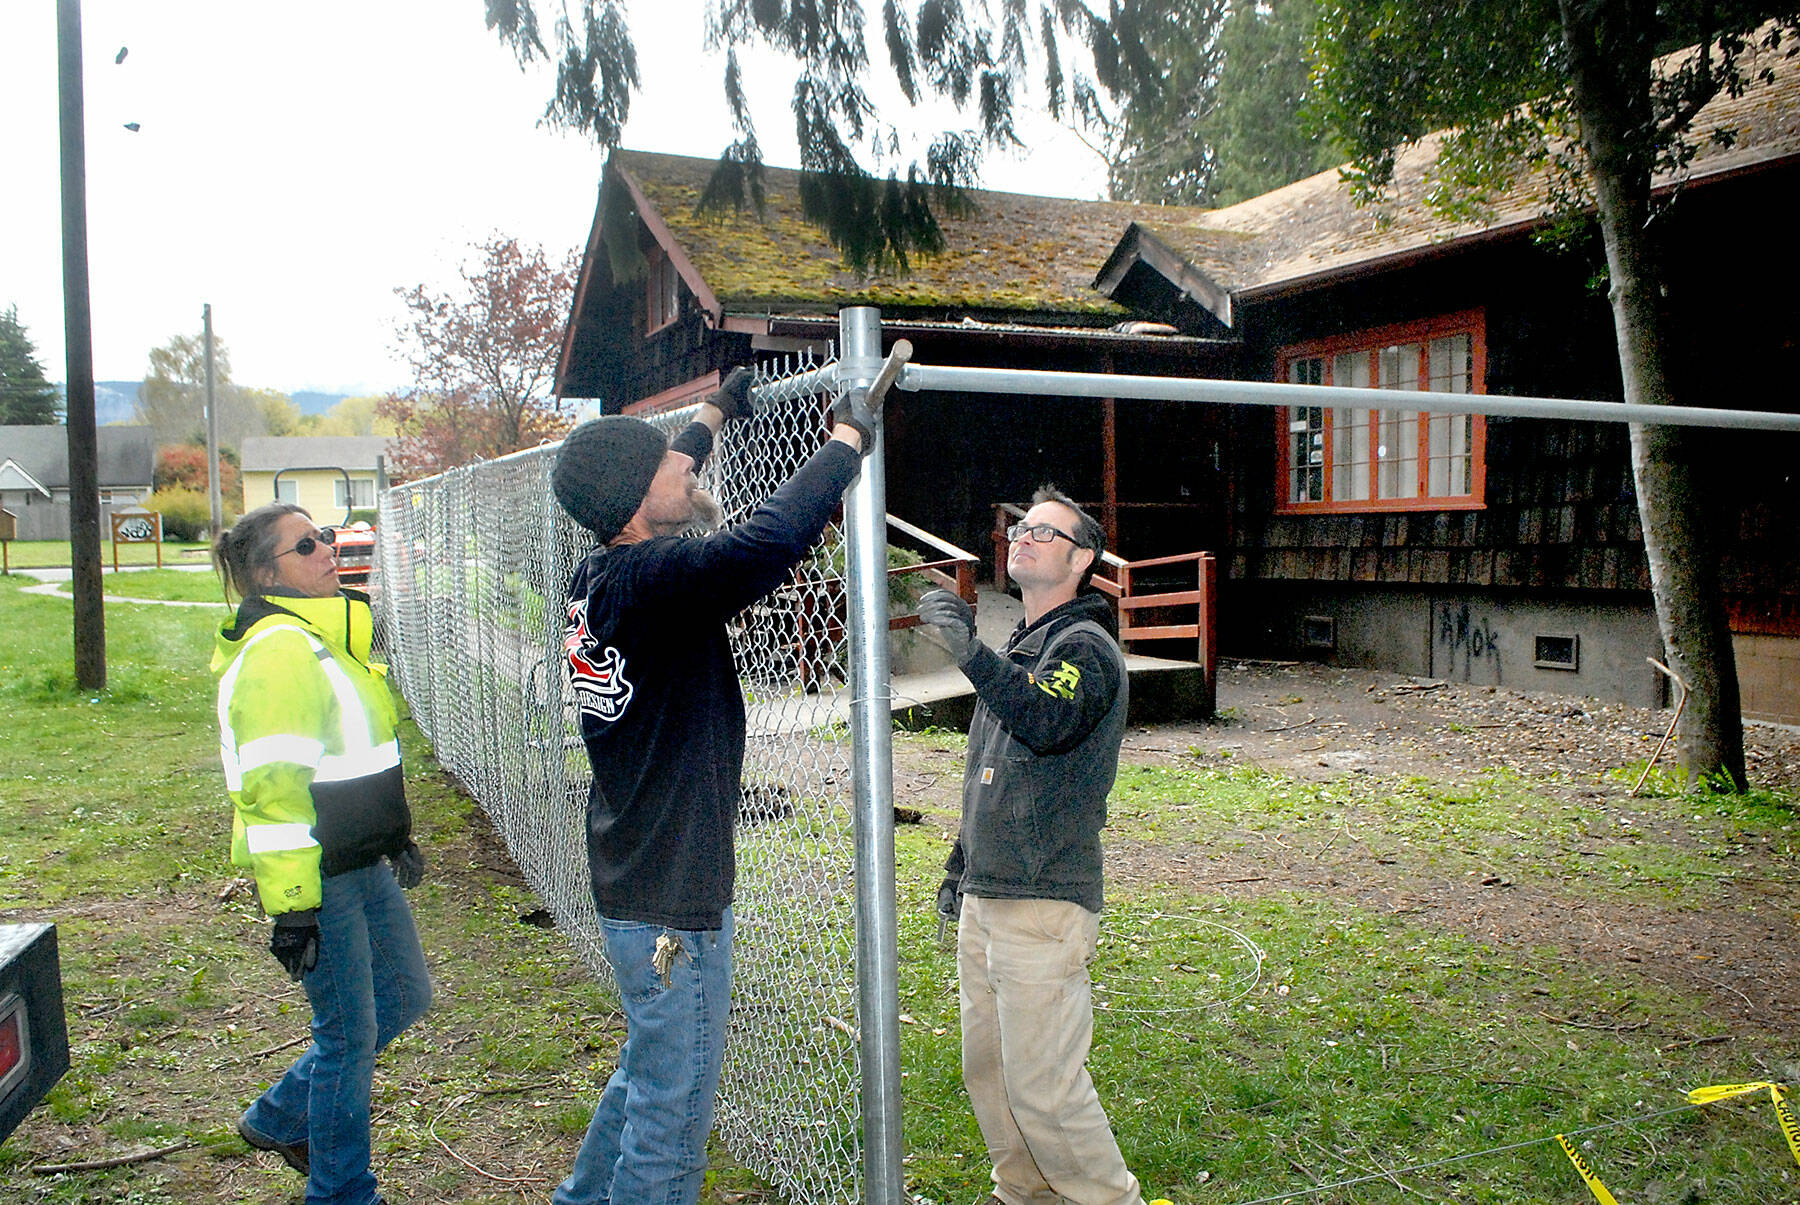 Port Angeles Parks and Recreation Department workers, from left, Brooke Keohokalole, Darryl Anderson and Eli Hammel install a chain link fence around a portion of the Campfire Clubhouse at Jessie Webster Park on Wednesday. (Keith Thorpe/Peninsula Daily News)